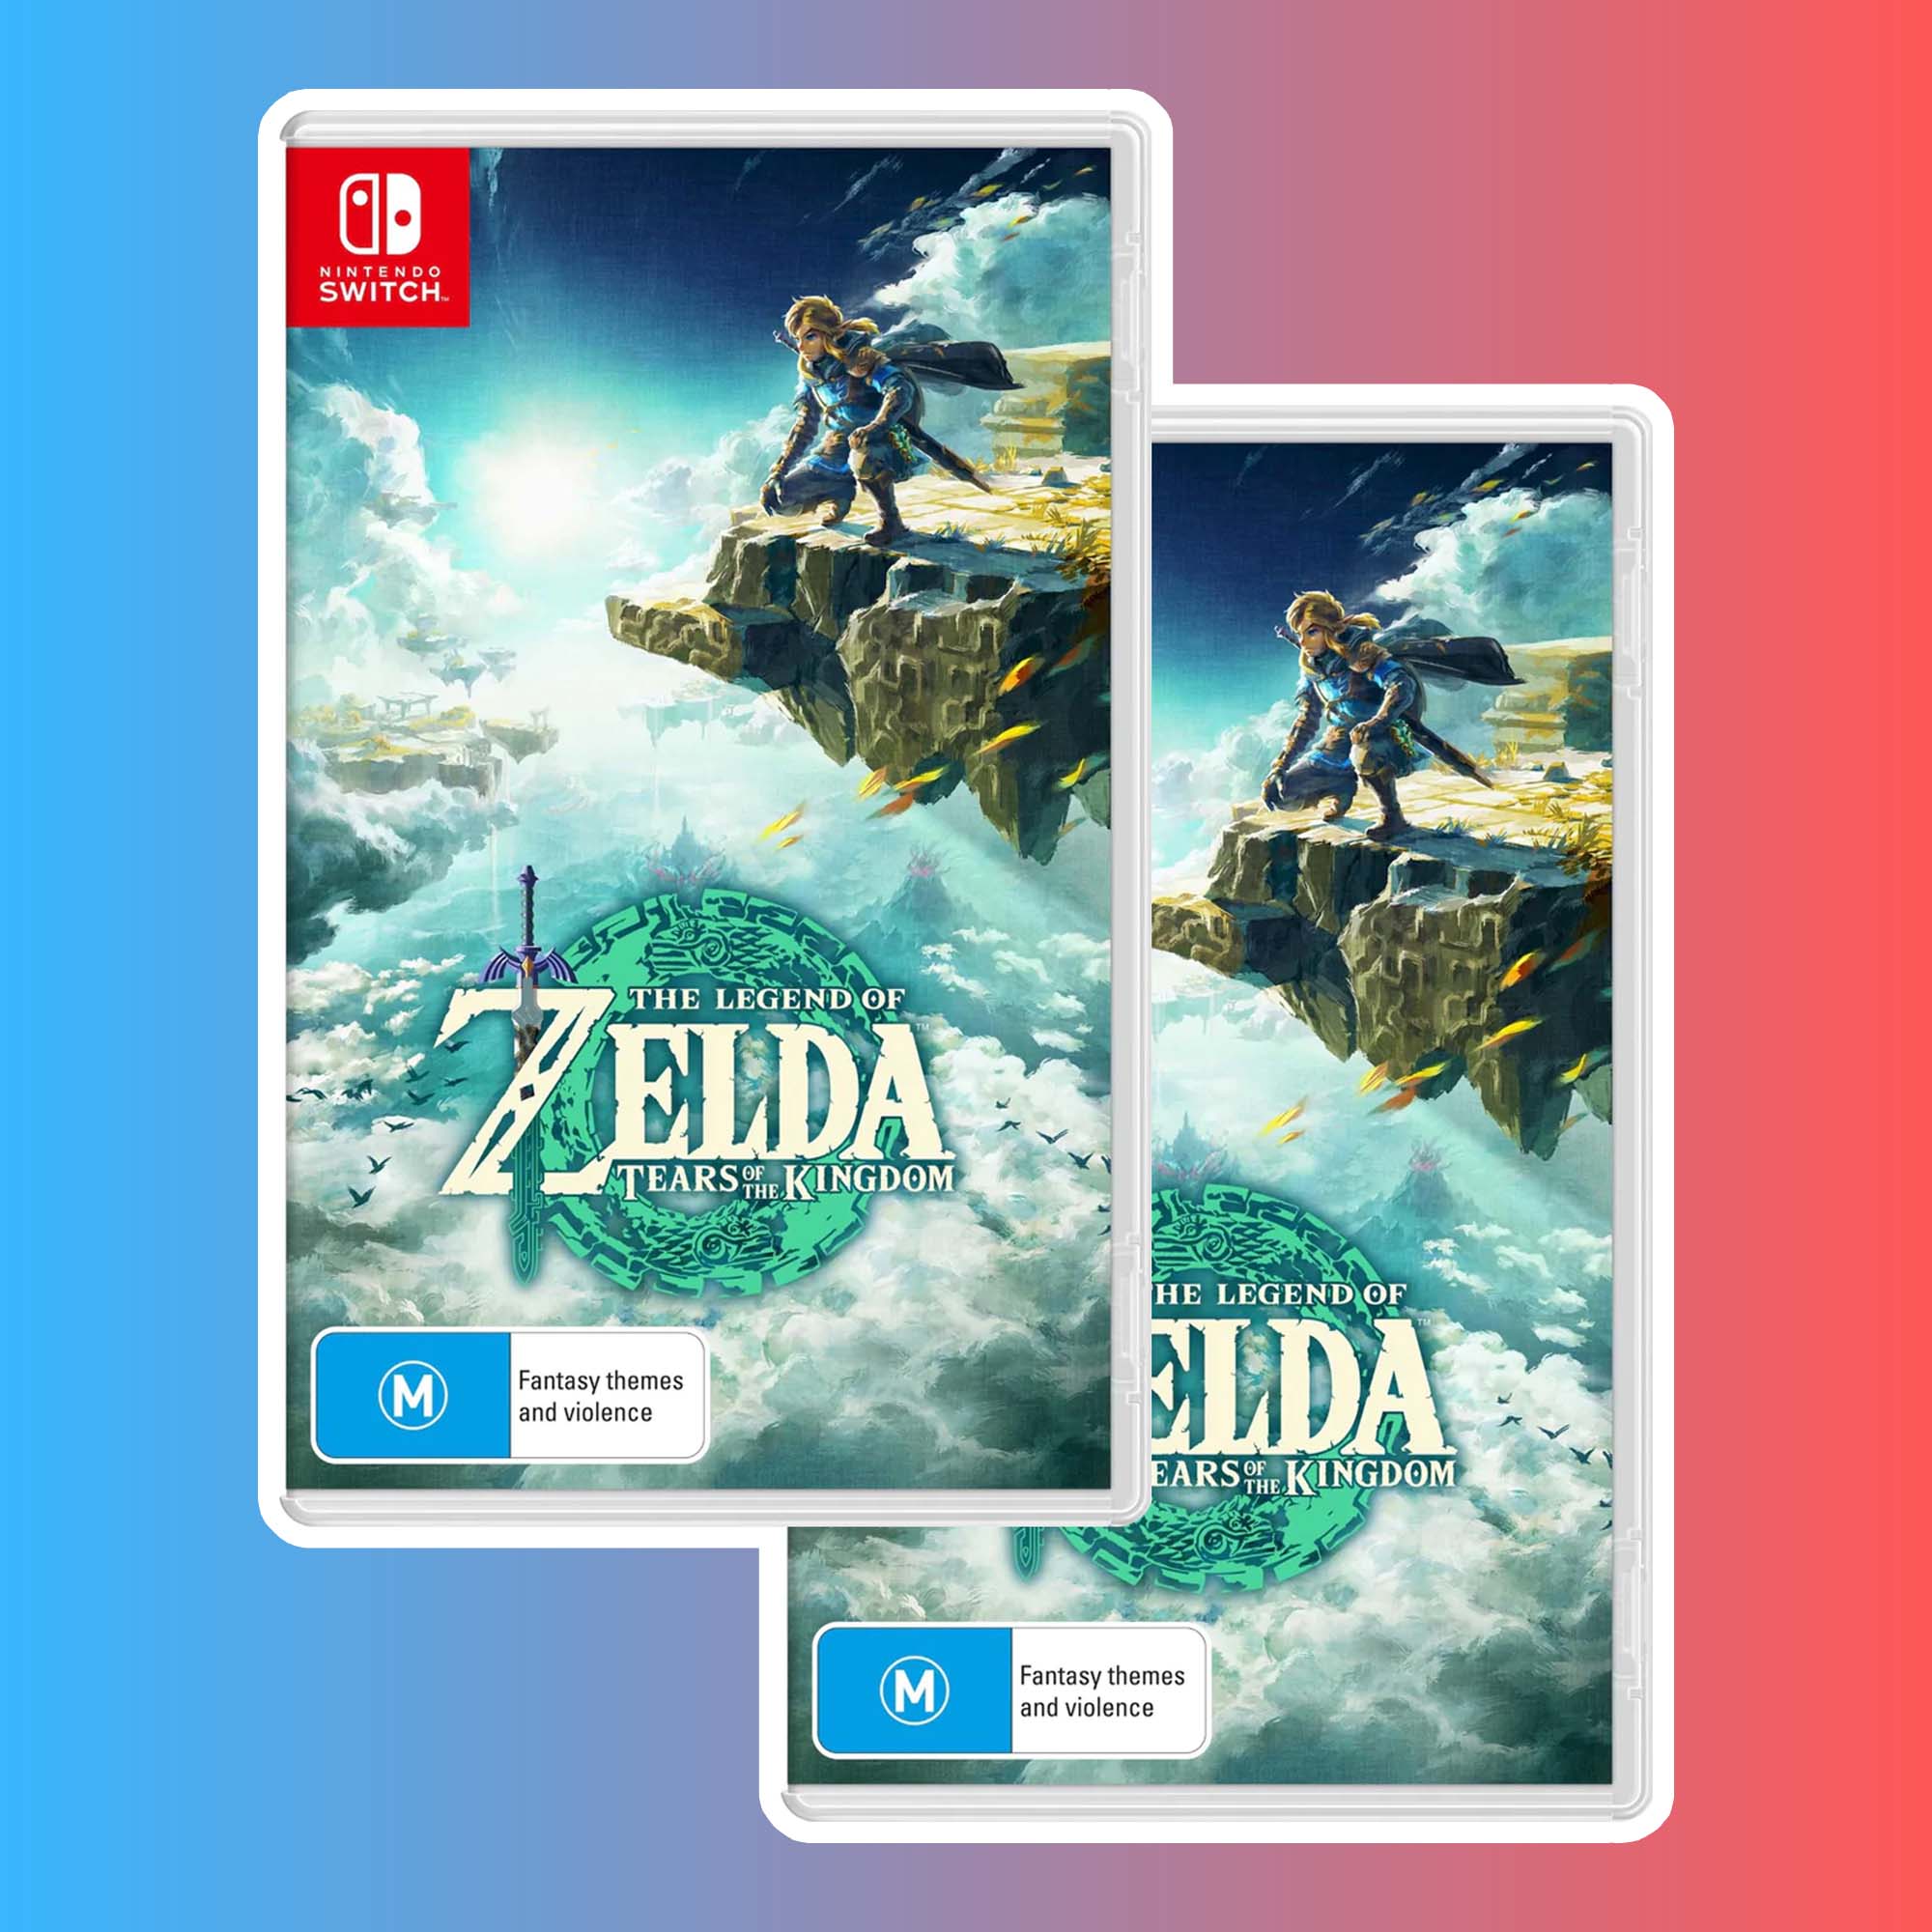 Zelda Tears of the Kingdom Guide pre-orders now live from $30